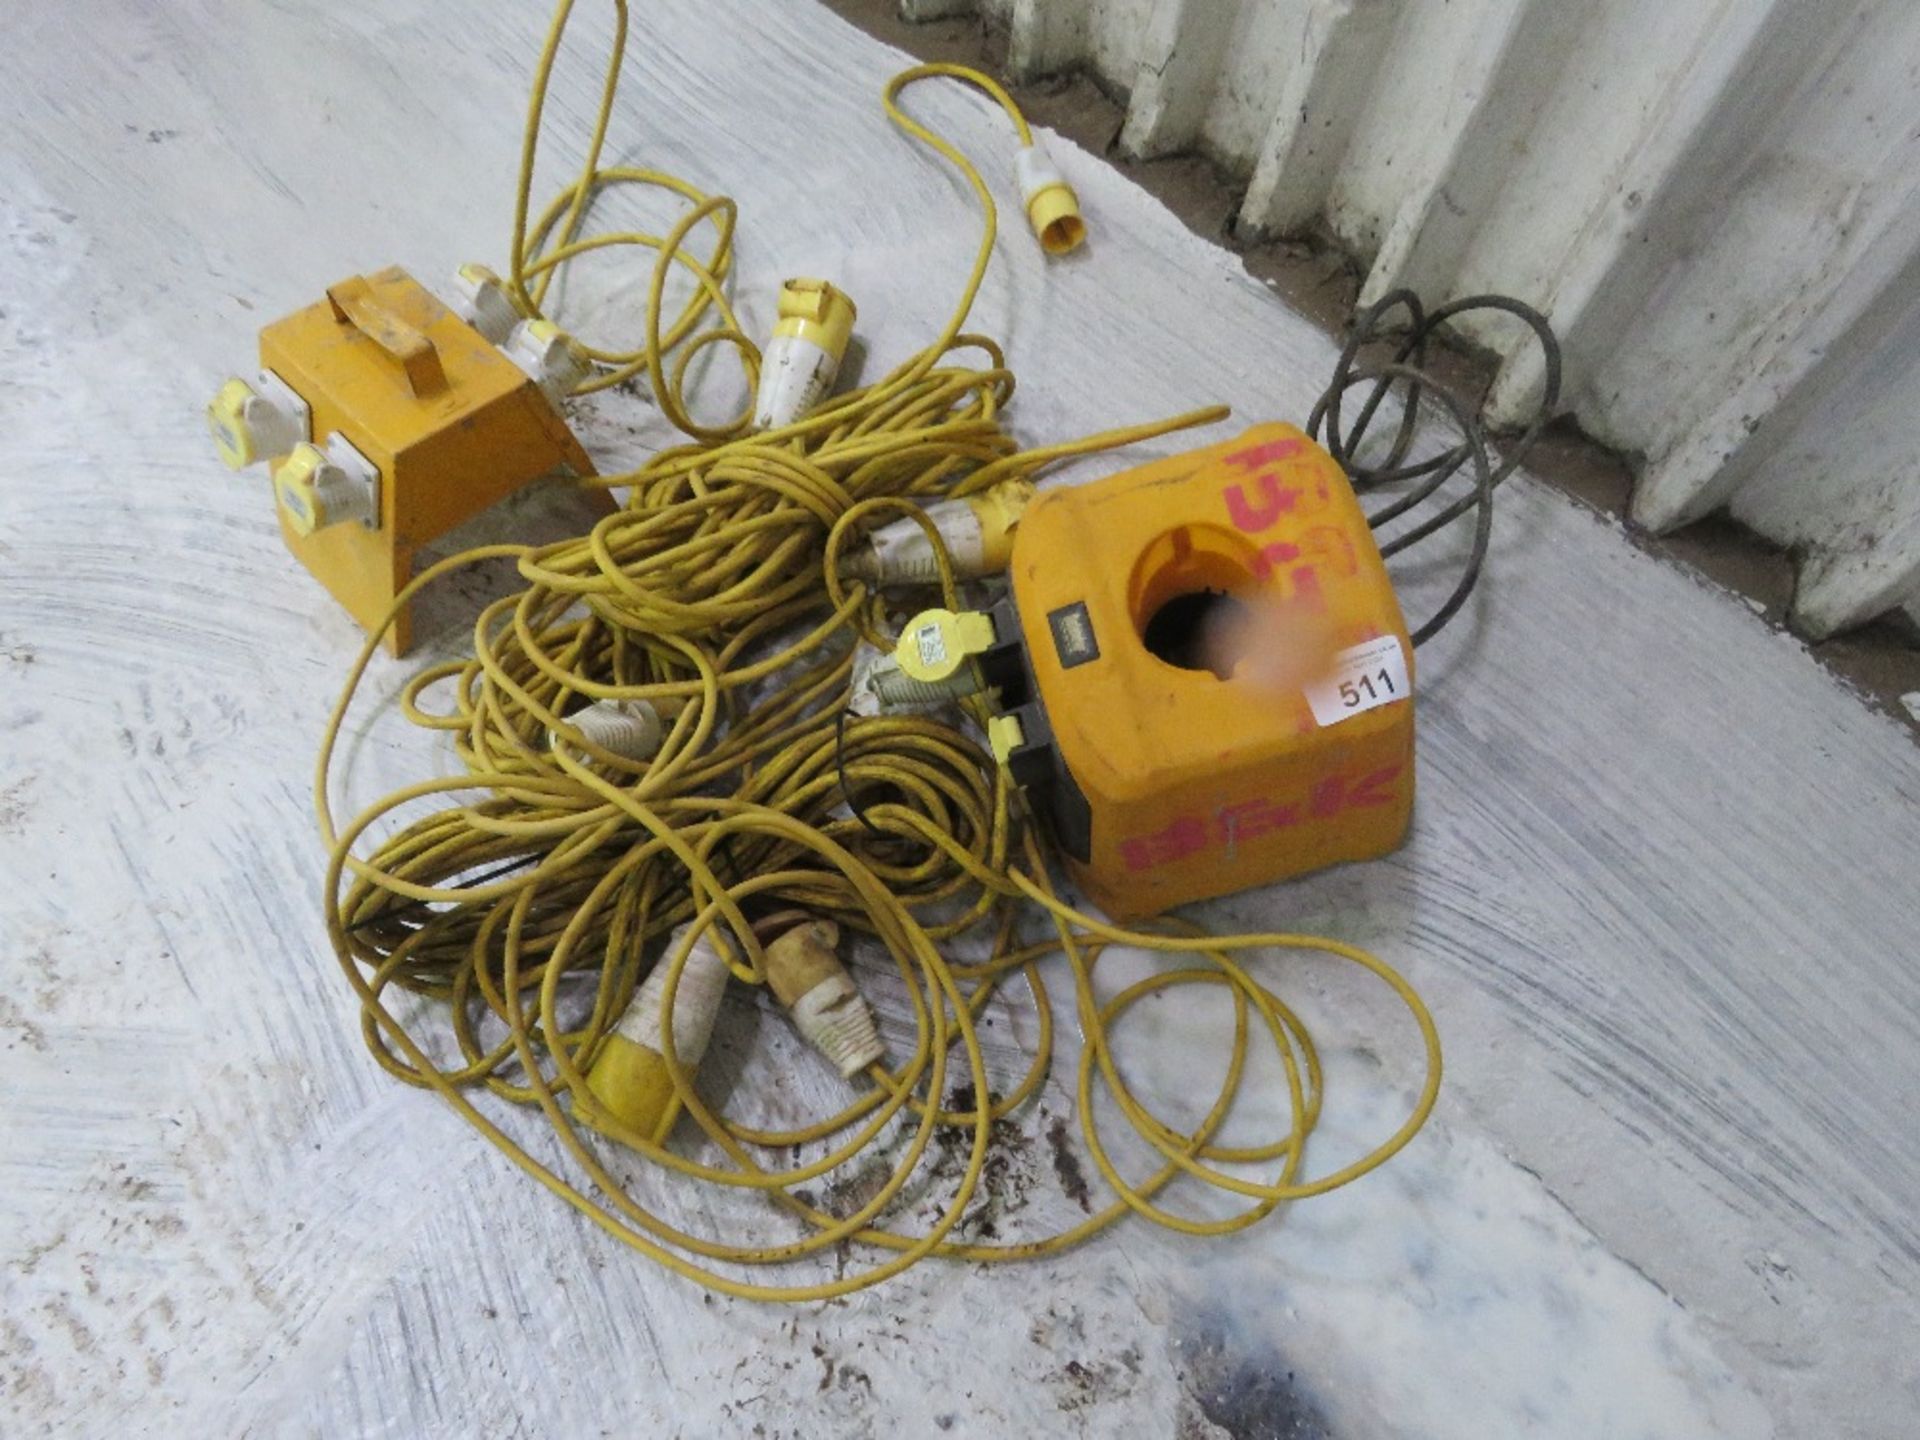 EXTENSION LEADS PLUS 2NO JUNCTION BOXES 110VOLT POWERED. SOURCED FROM COMPANY LIQUIDATION. THIS